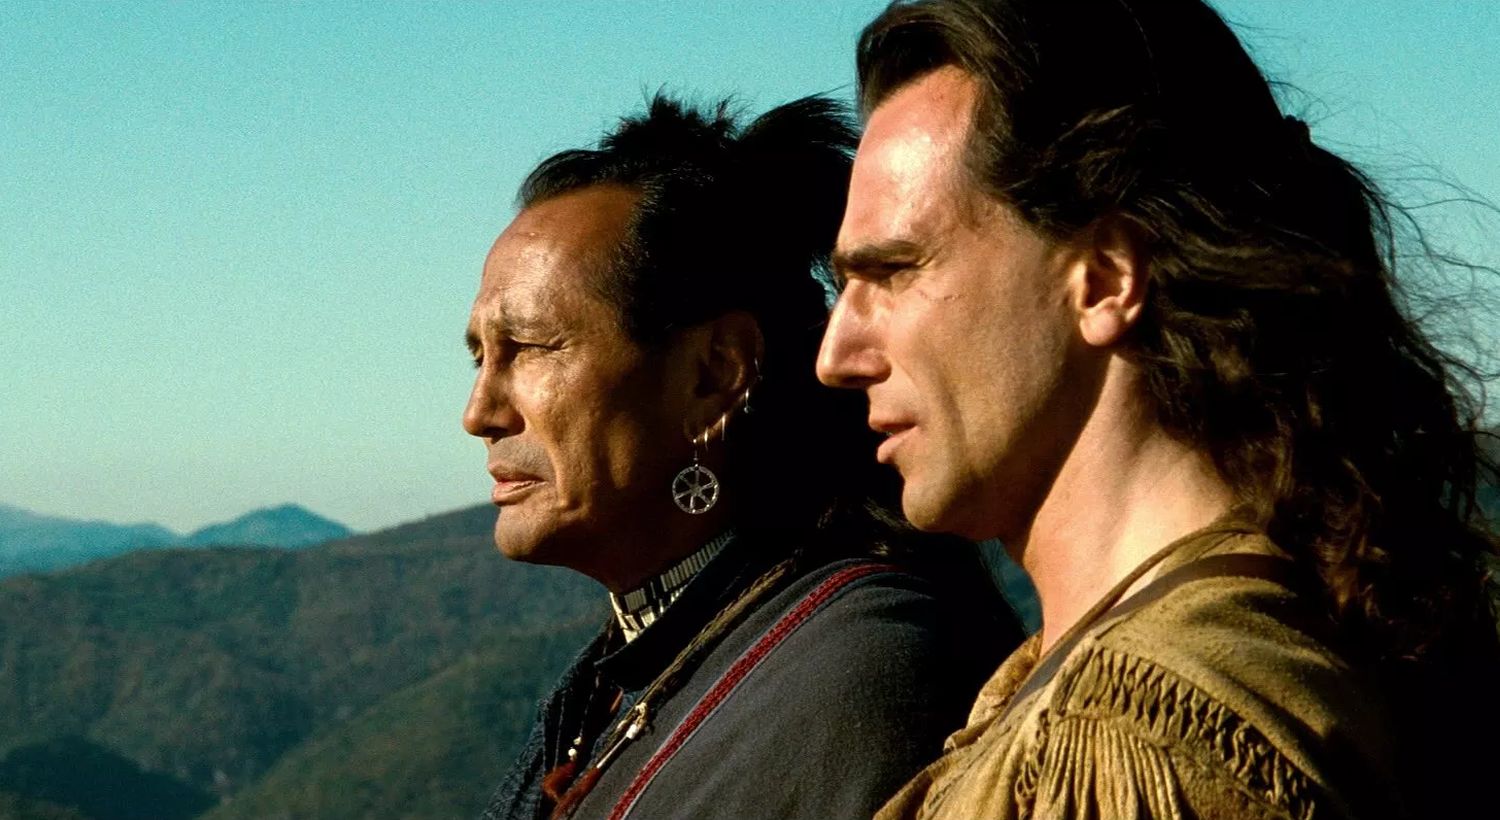 Still from The Last of the Mohicans